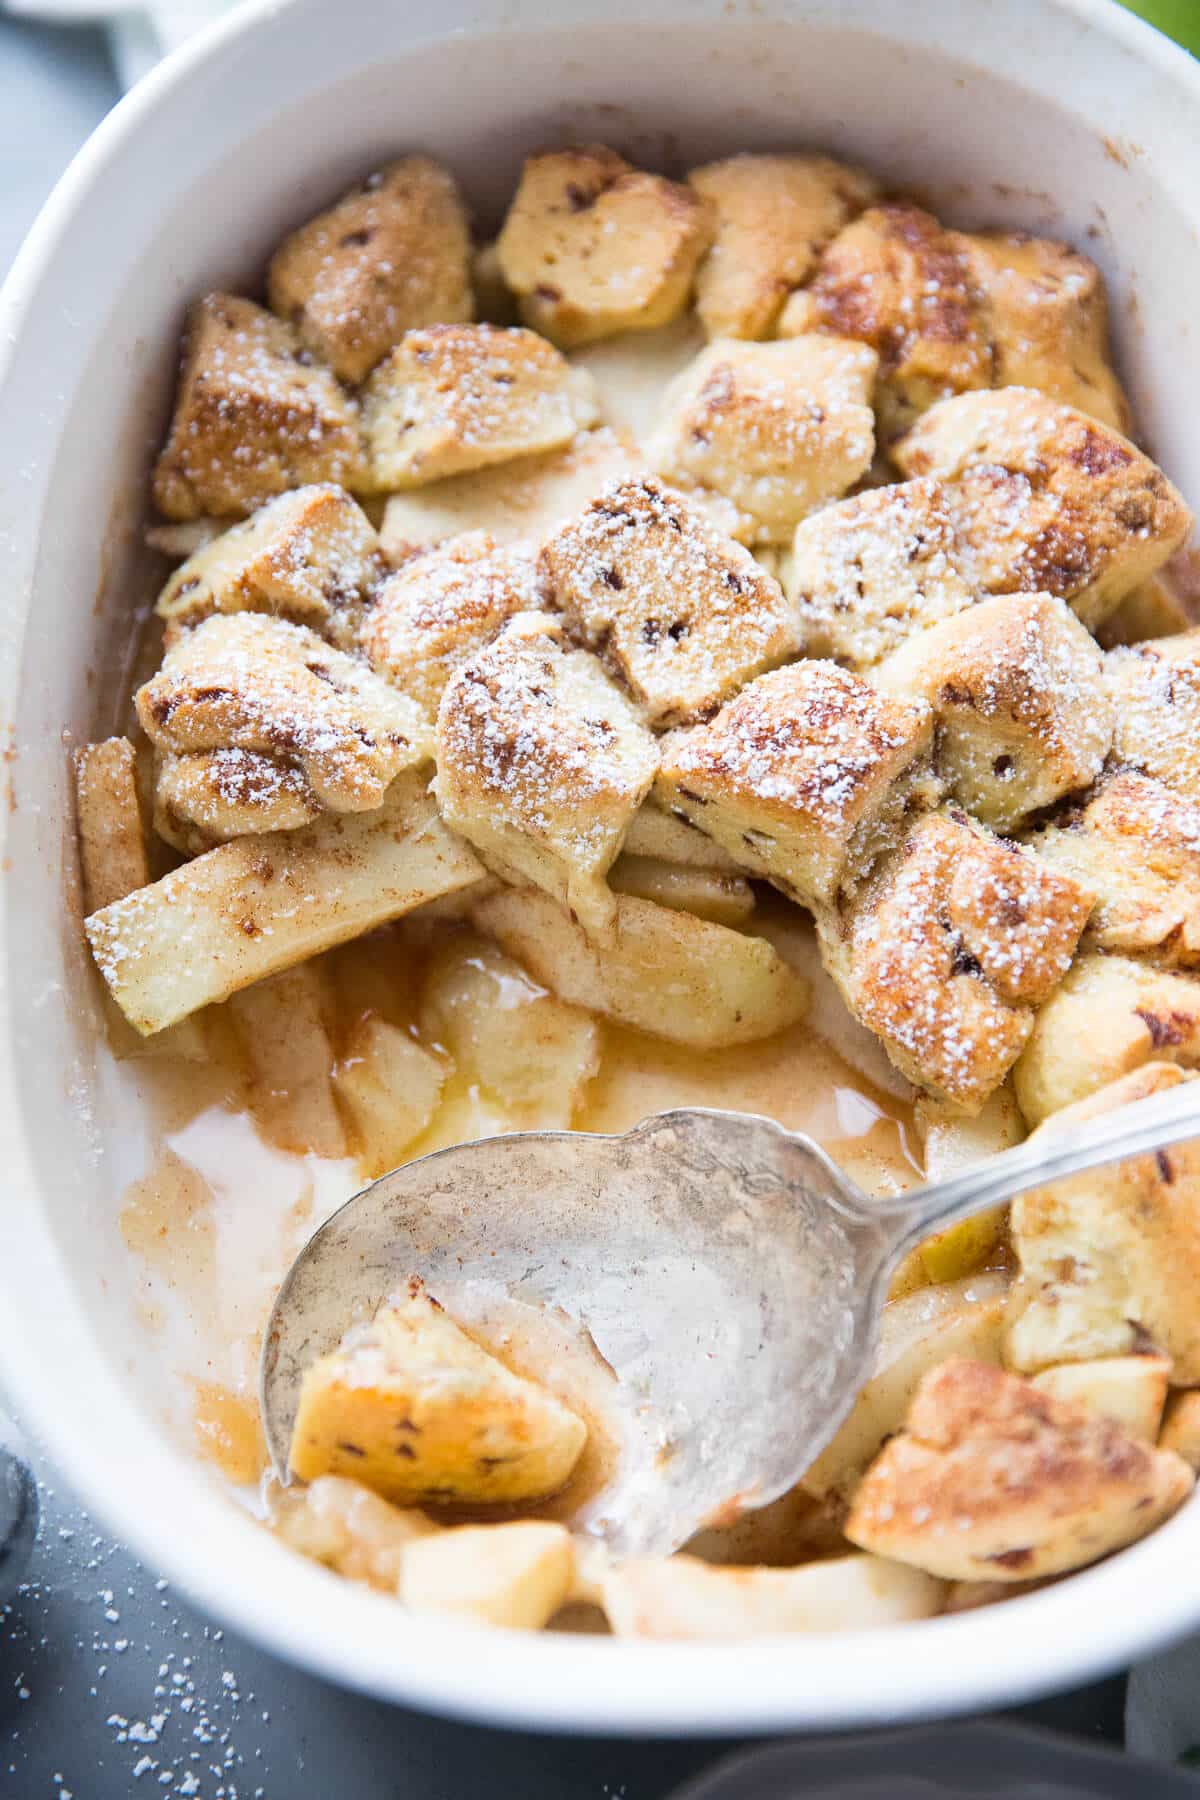 This easy apple cobbler recipe is fabulous! Tart apples, cinnamon, and sugar make the perfect apple base.  Store bought cinnamon rolls make an unforgettably delicious topping!